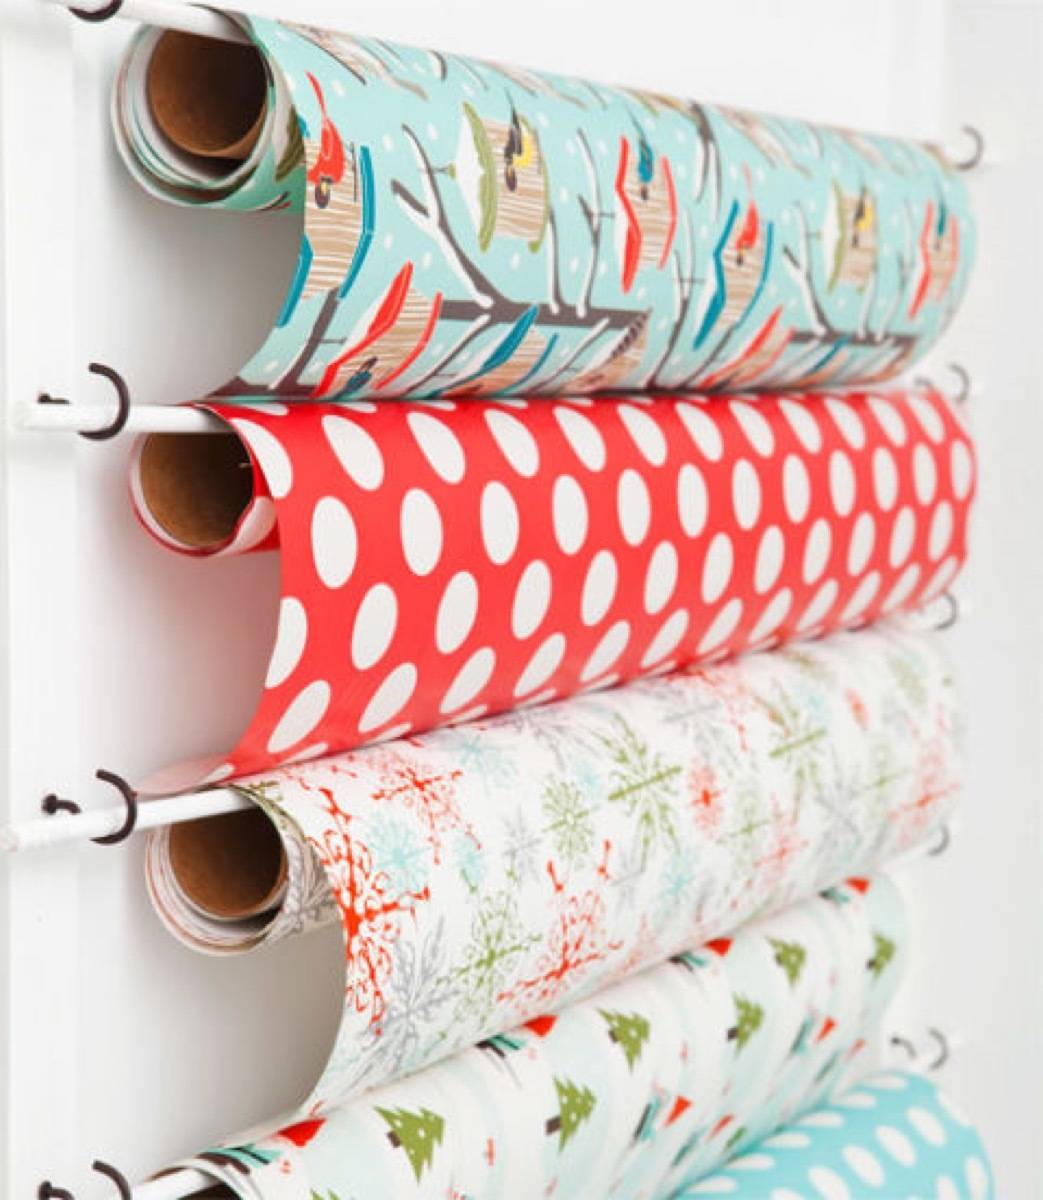 Wrapping paper can be conveniently stored on dowel rods and hooks | 72 Organization Tips and Projects for Every Space in Your Home